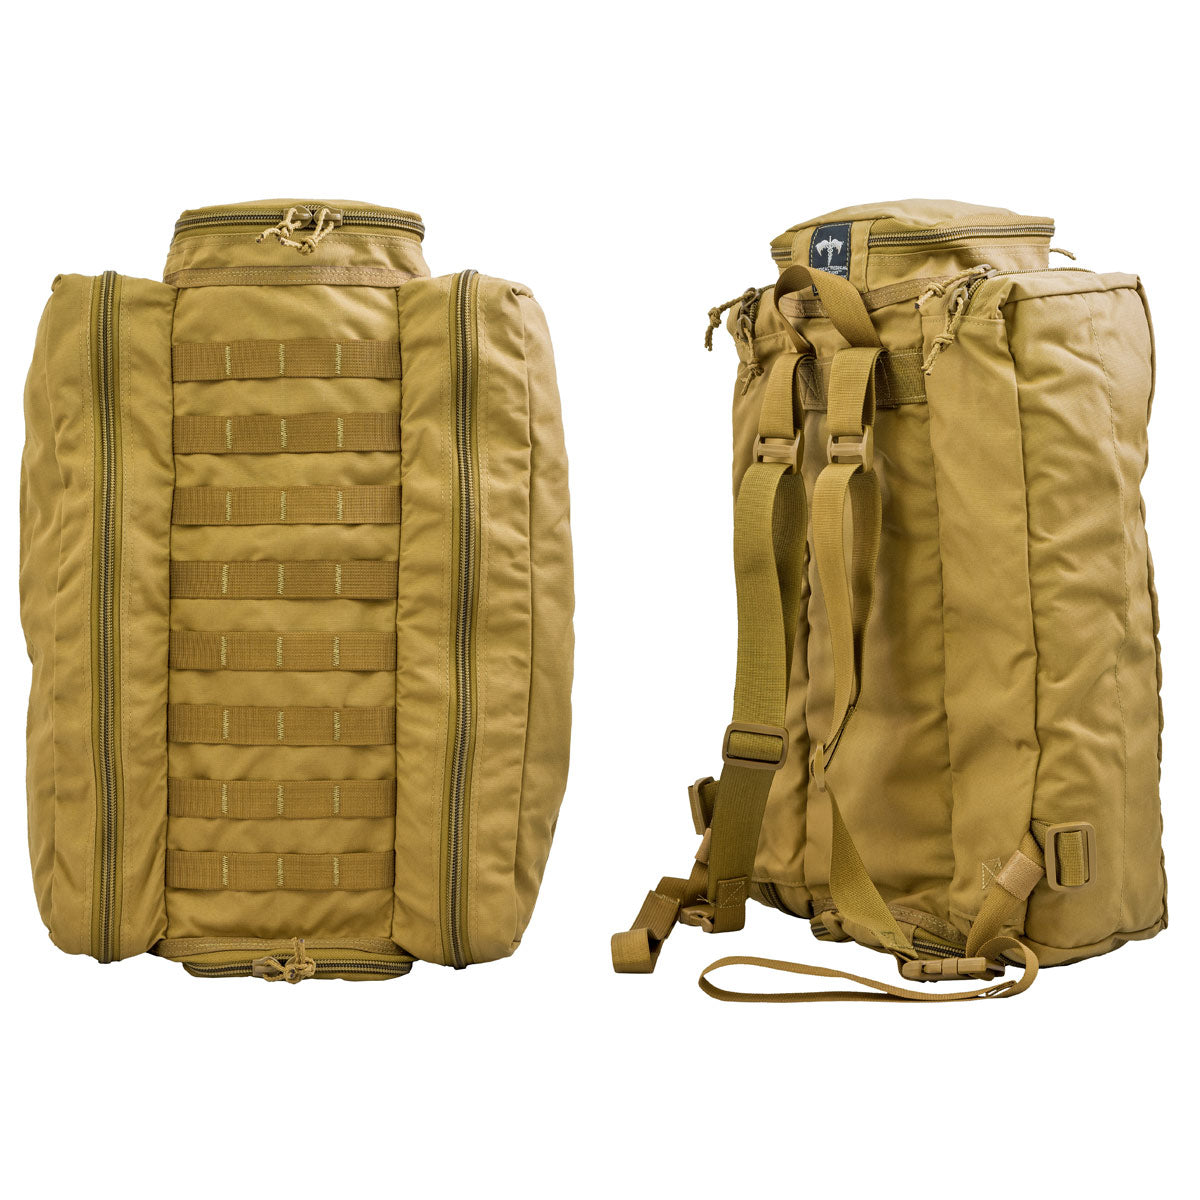 TacMed™ ARK™ Kit - Active Shooter Response and Evacuation Versions